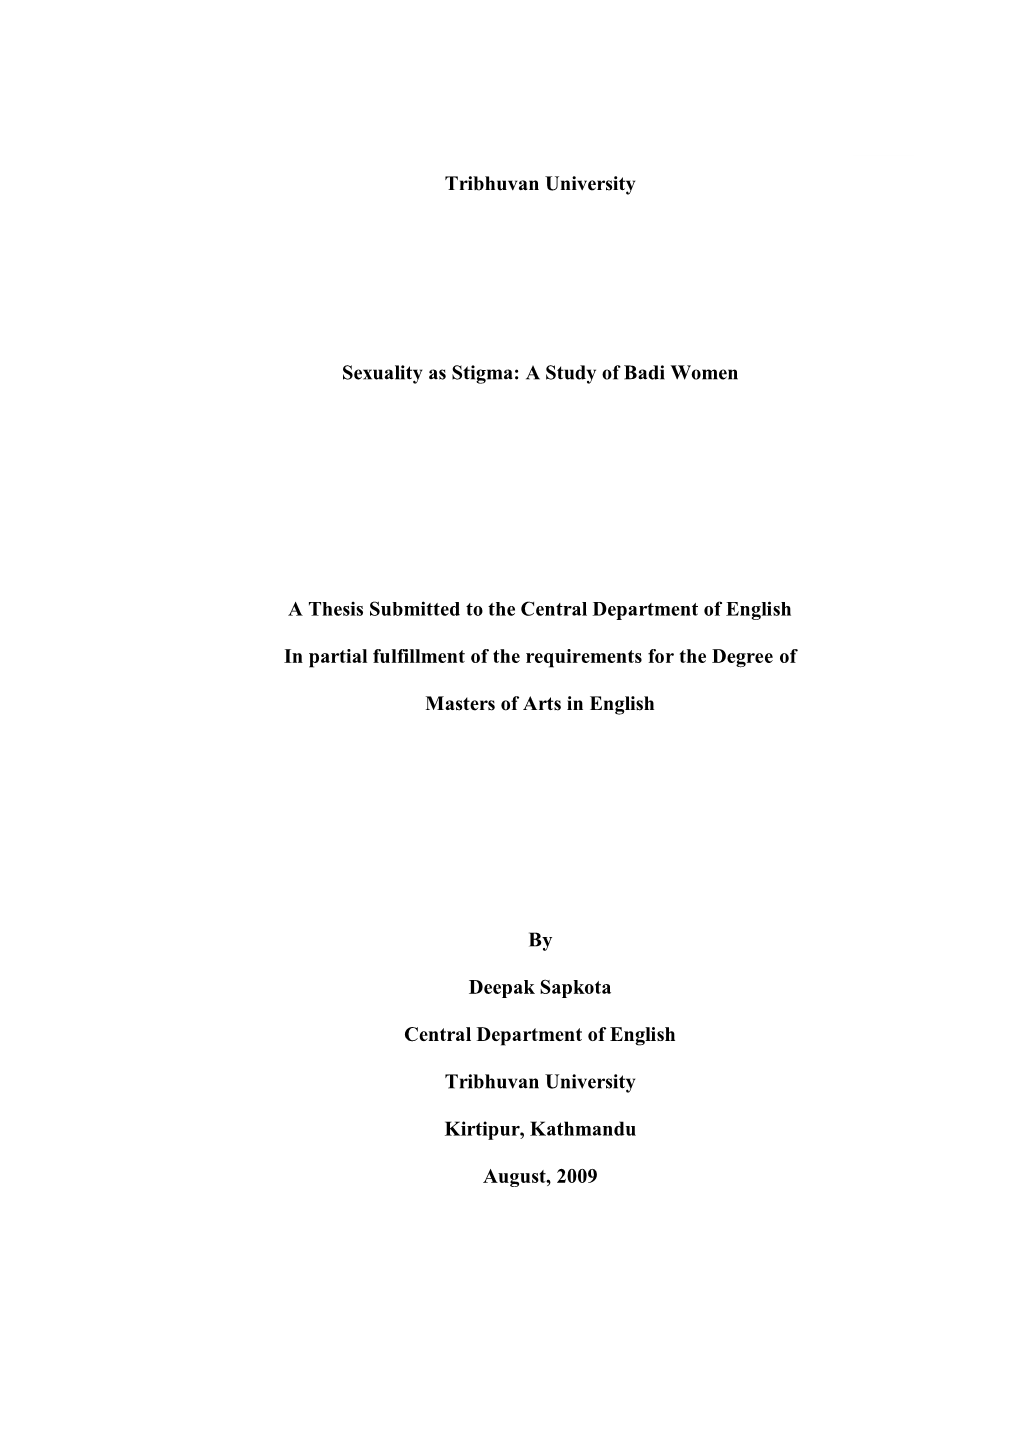 A Study of Badi Women a Thesis Submitted to the Central